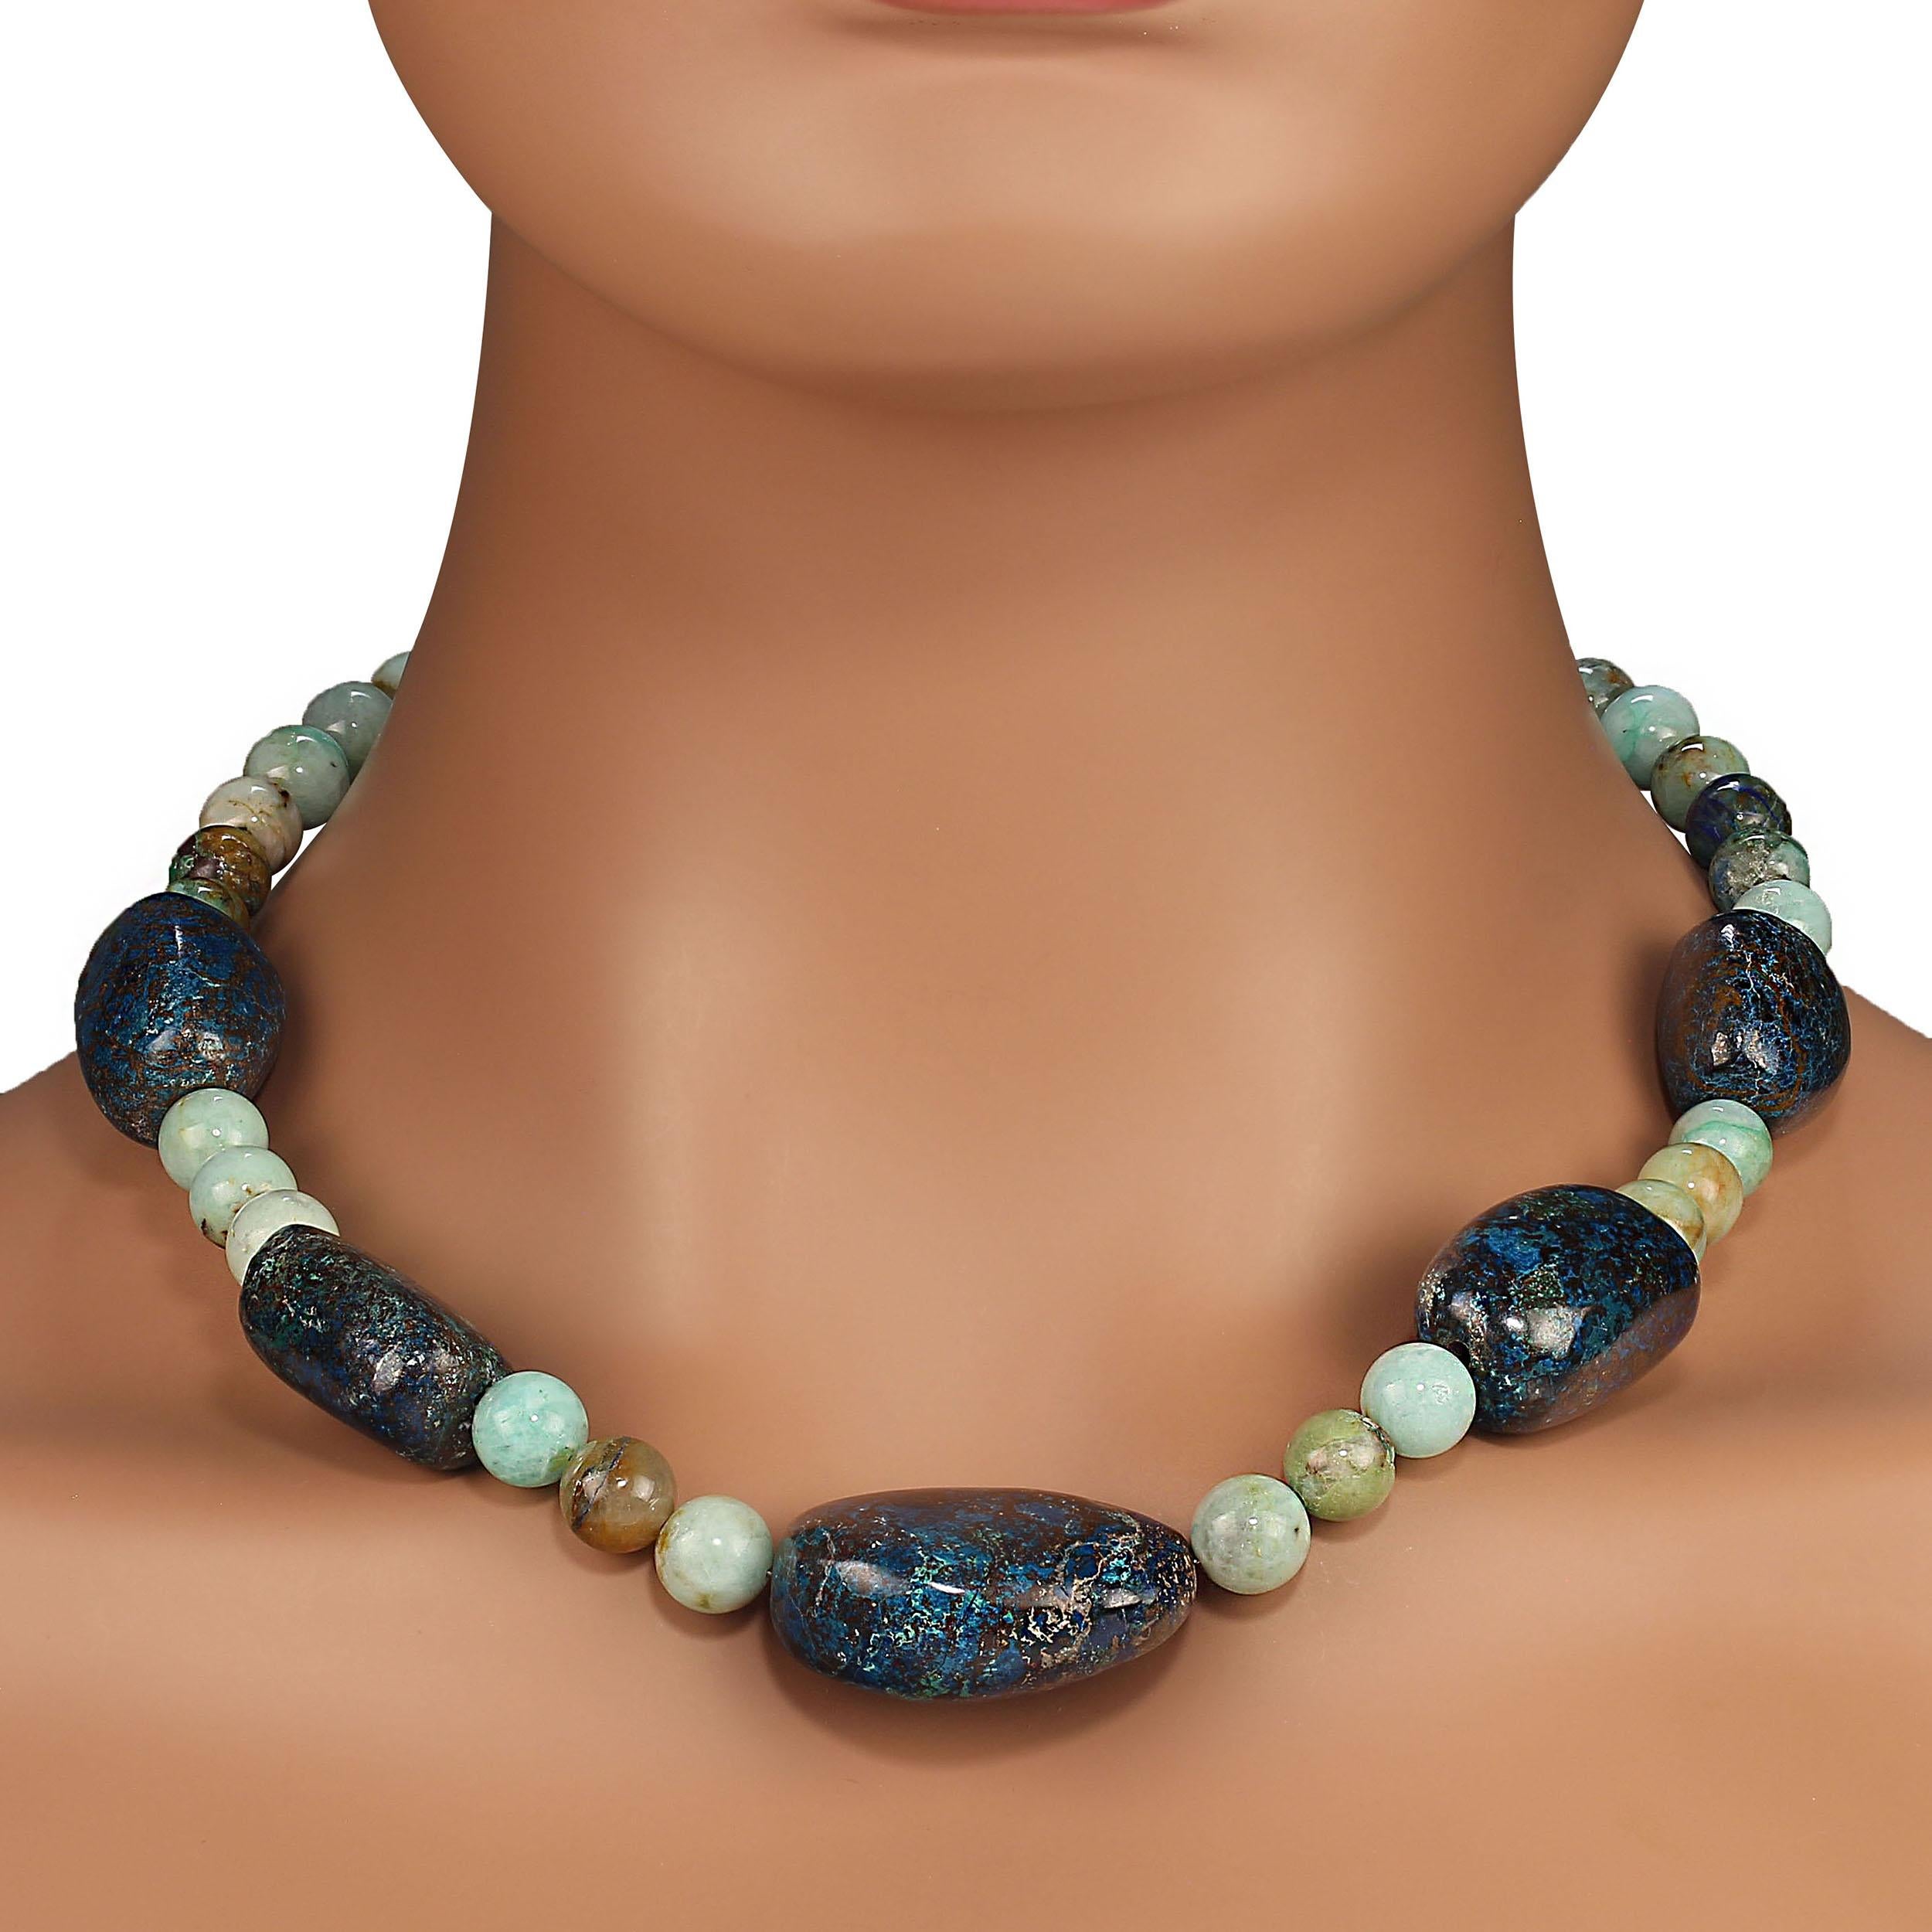 AJD 19 Inch Chrysocolla Statement necklace with Gorgeous Focal pieces Great Gift For Sale